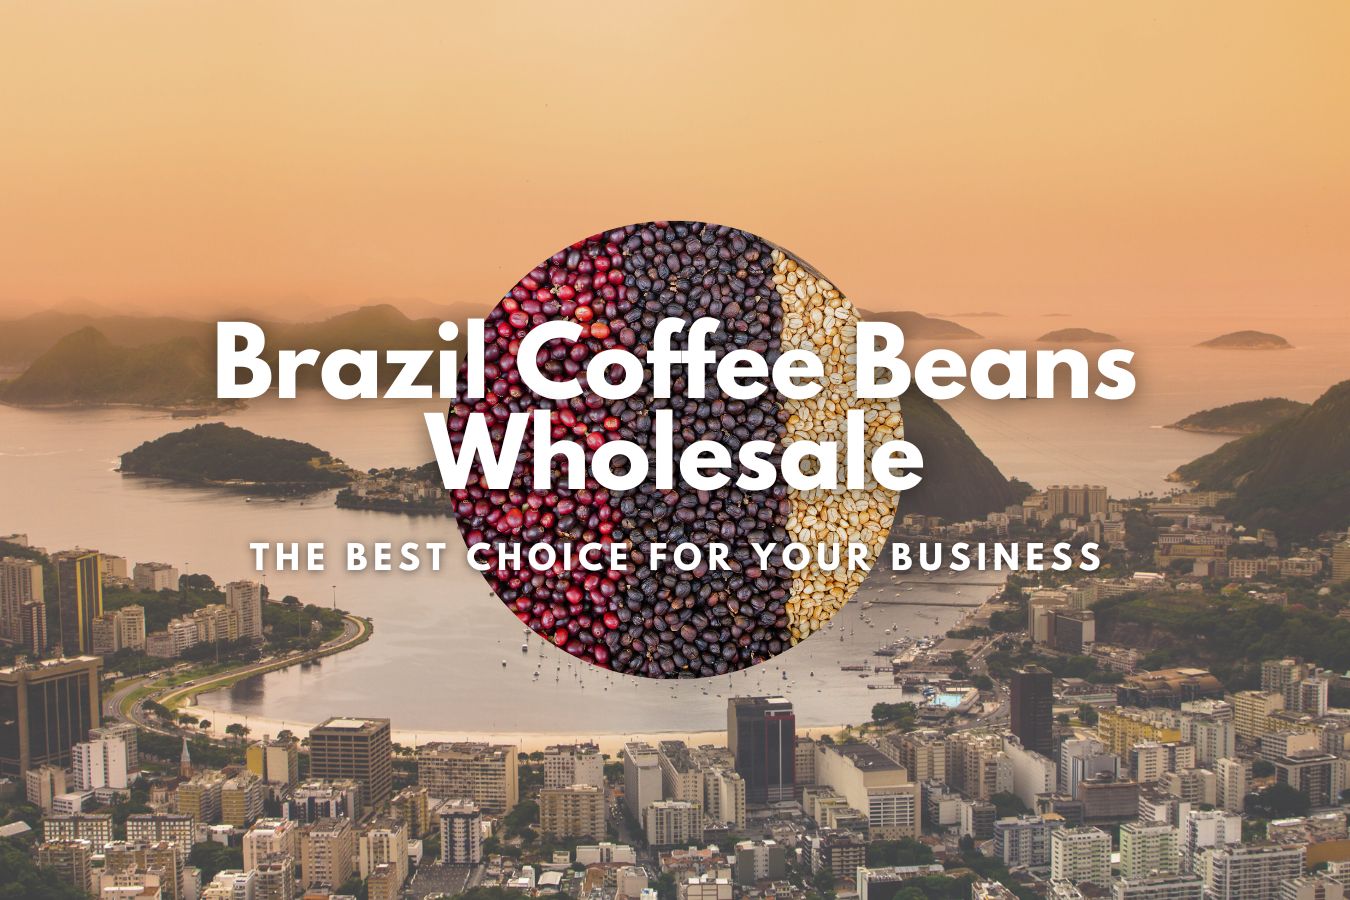 Brazil Coffee Beans Wholesale: The Best Choice for Your Business